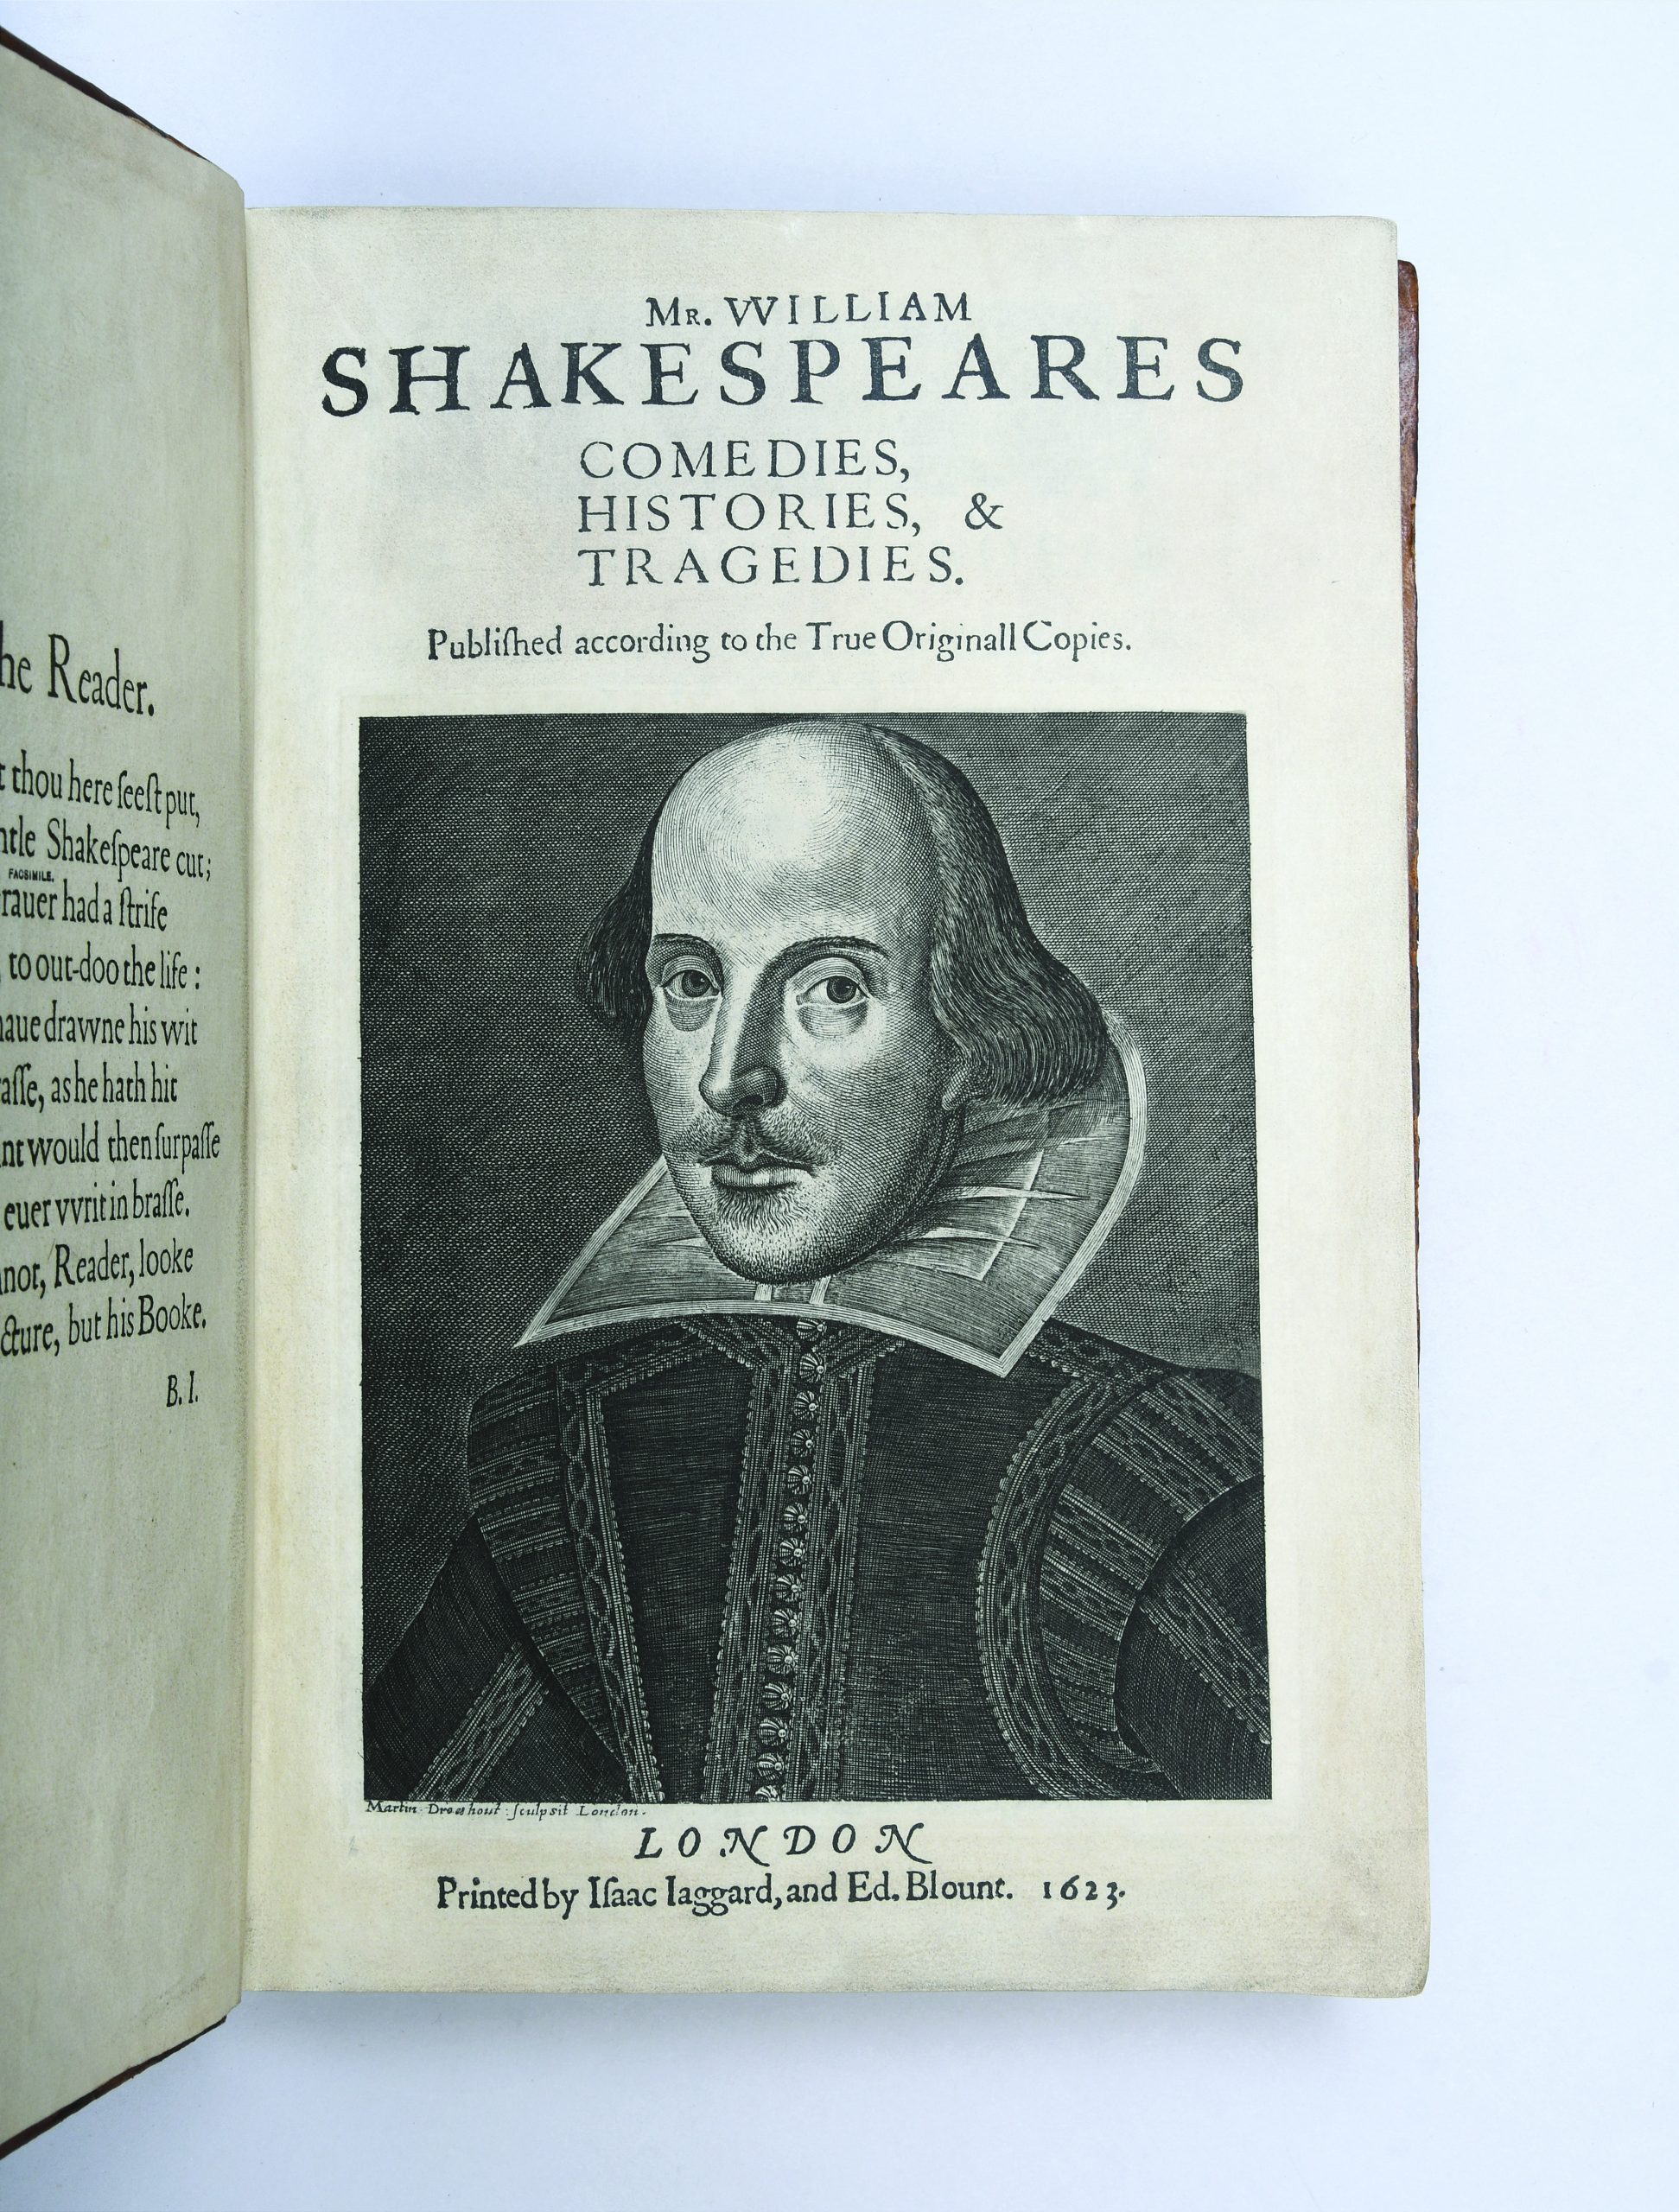 Frontispiece from Shakespeare's First Folio with the author portrait.